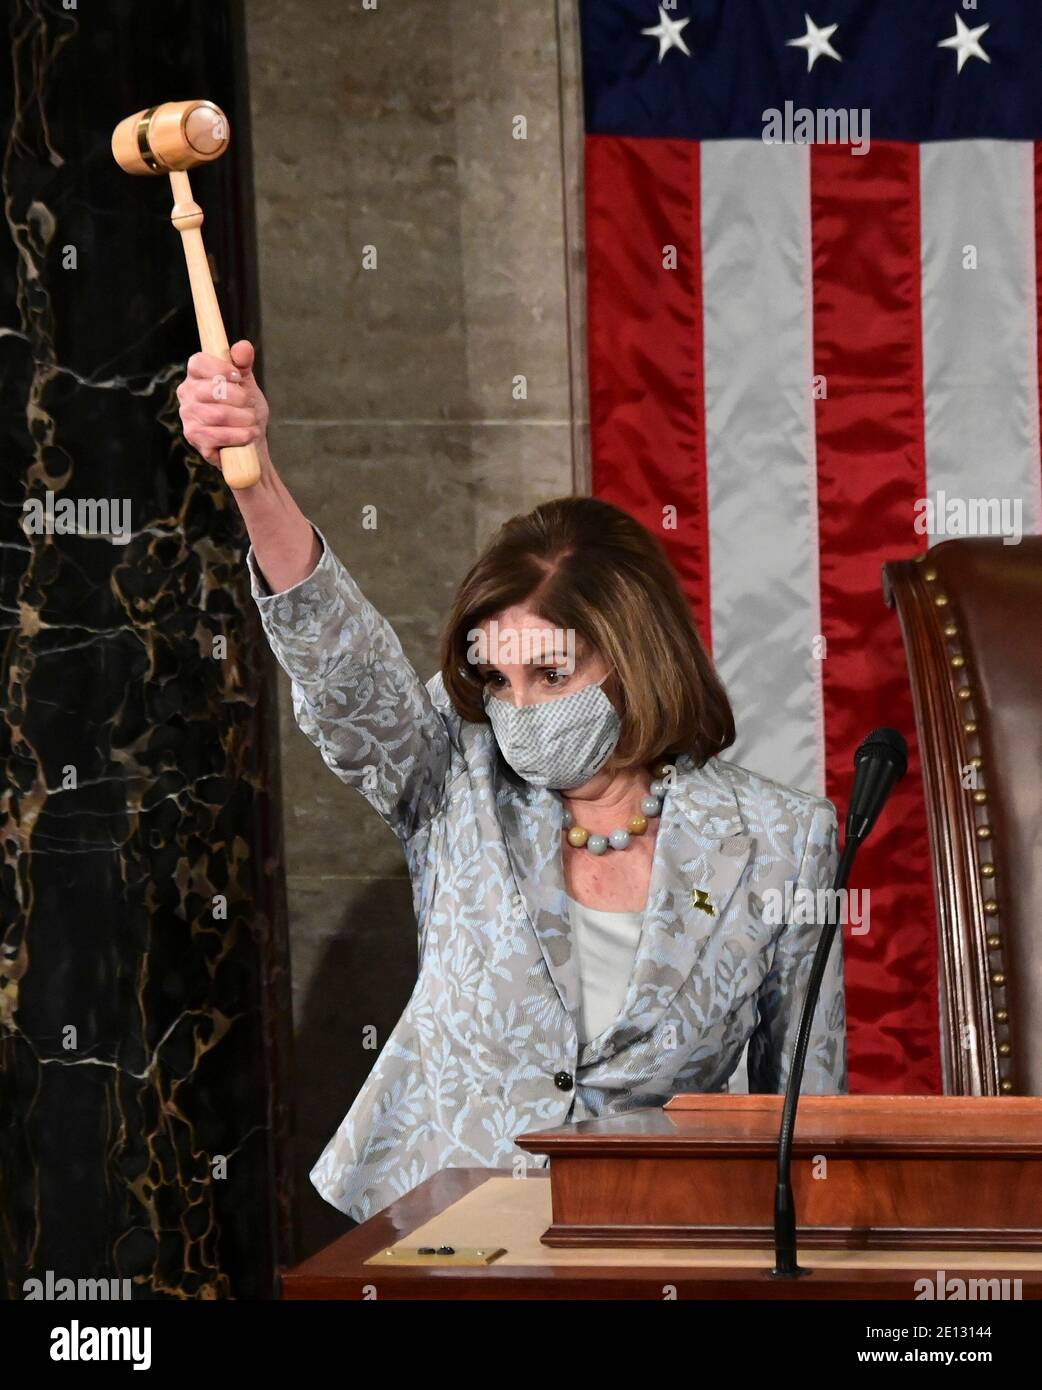 (210104) -- WASHINGTON, D.C., Jan. 4, 2021 (Xinhua) -- U.S. House Speaker Nancy Pelosi waves a gavel during the first session of the 117th U.S. Congress in the House Chamber on Capitol Hill in Washington, DC, the United States, Jan. 3, 2021. Democratic Congresswoman Nancy Pelosi of California was reelected on Sunday as speaker of the U.S. House of Representatives, where her party has a narrow majority. (Erin Scott/Pool via Xinhua) Stock Photo